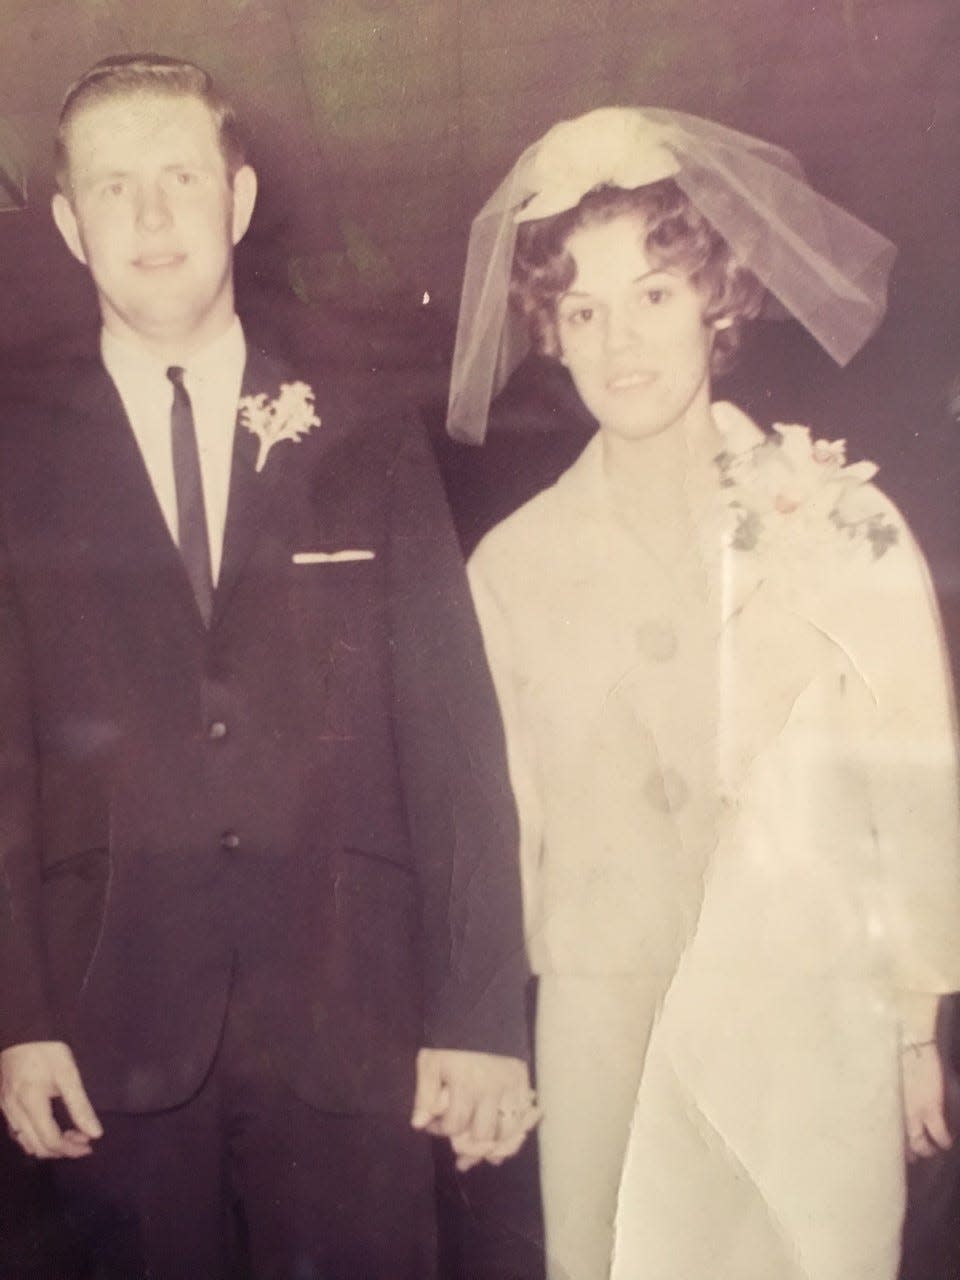 The couple in 1963.